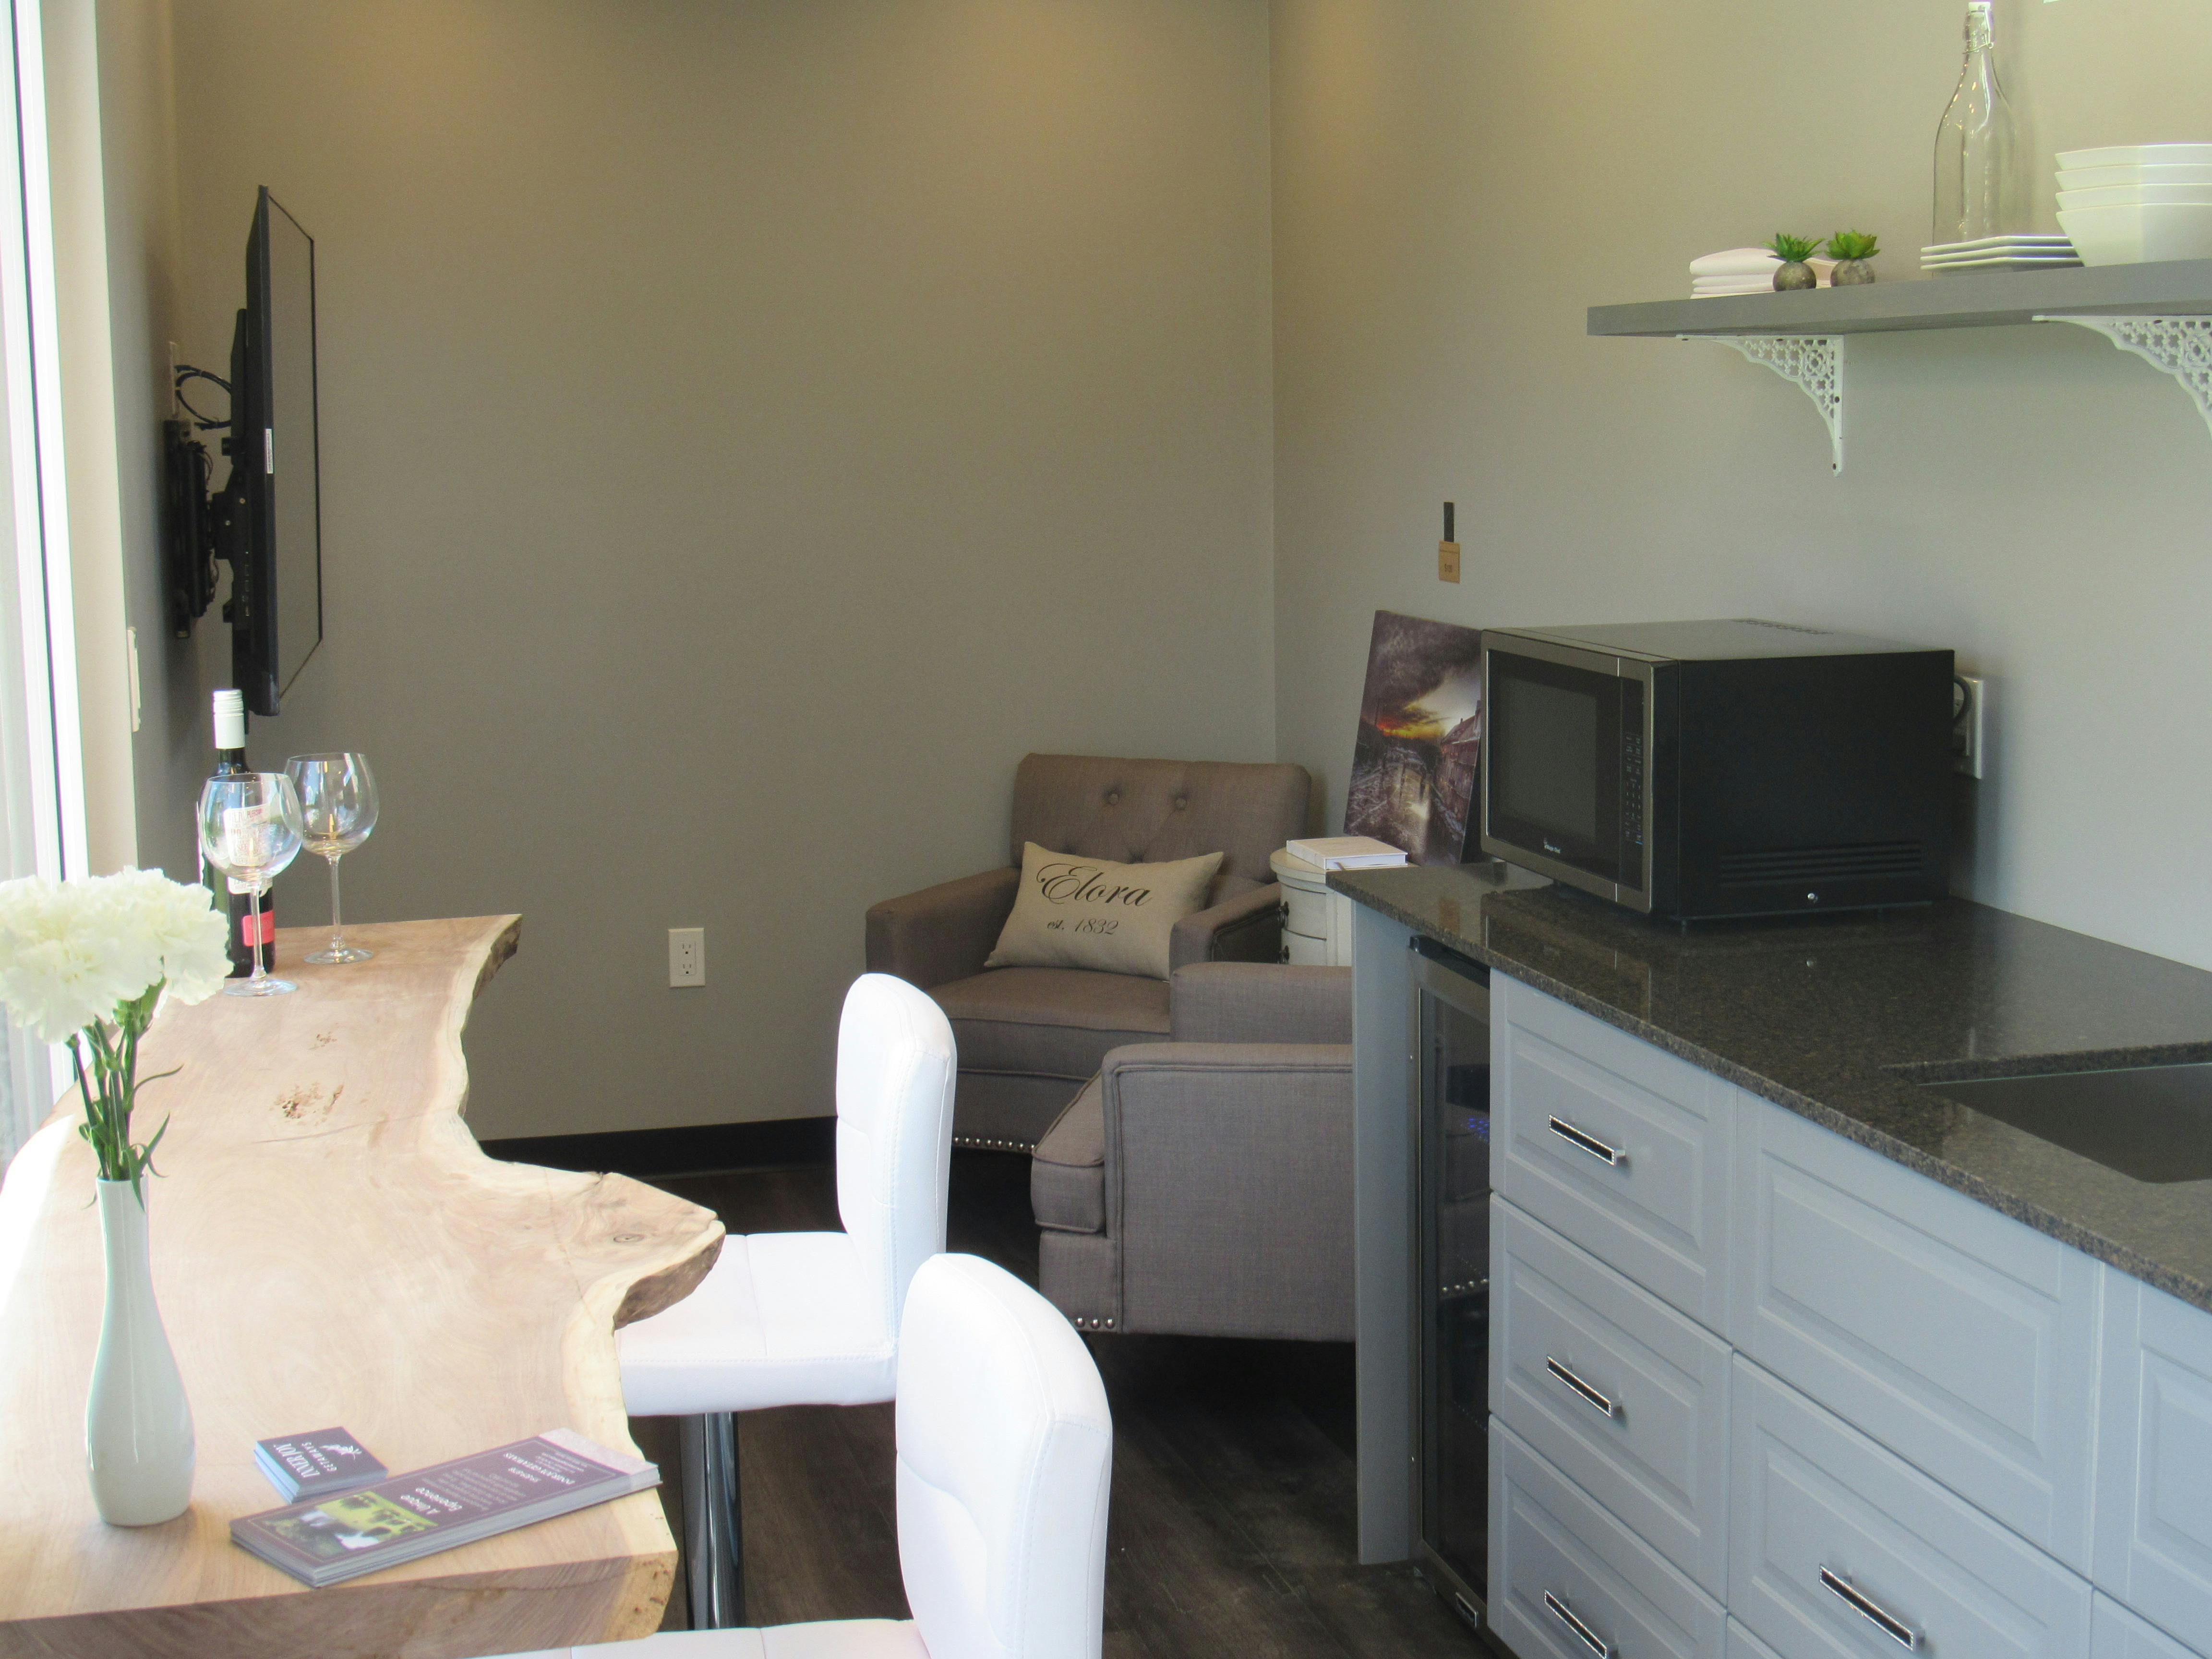 Seating area in the Elora Suite. 55" Flat screen TV.